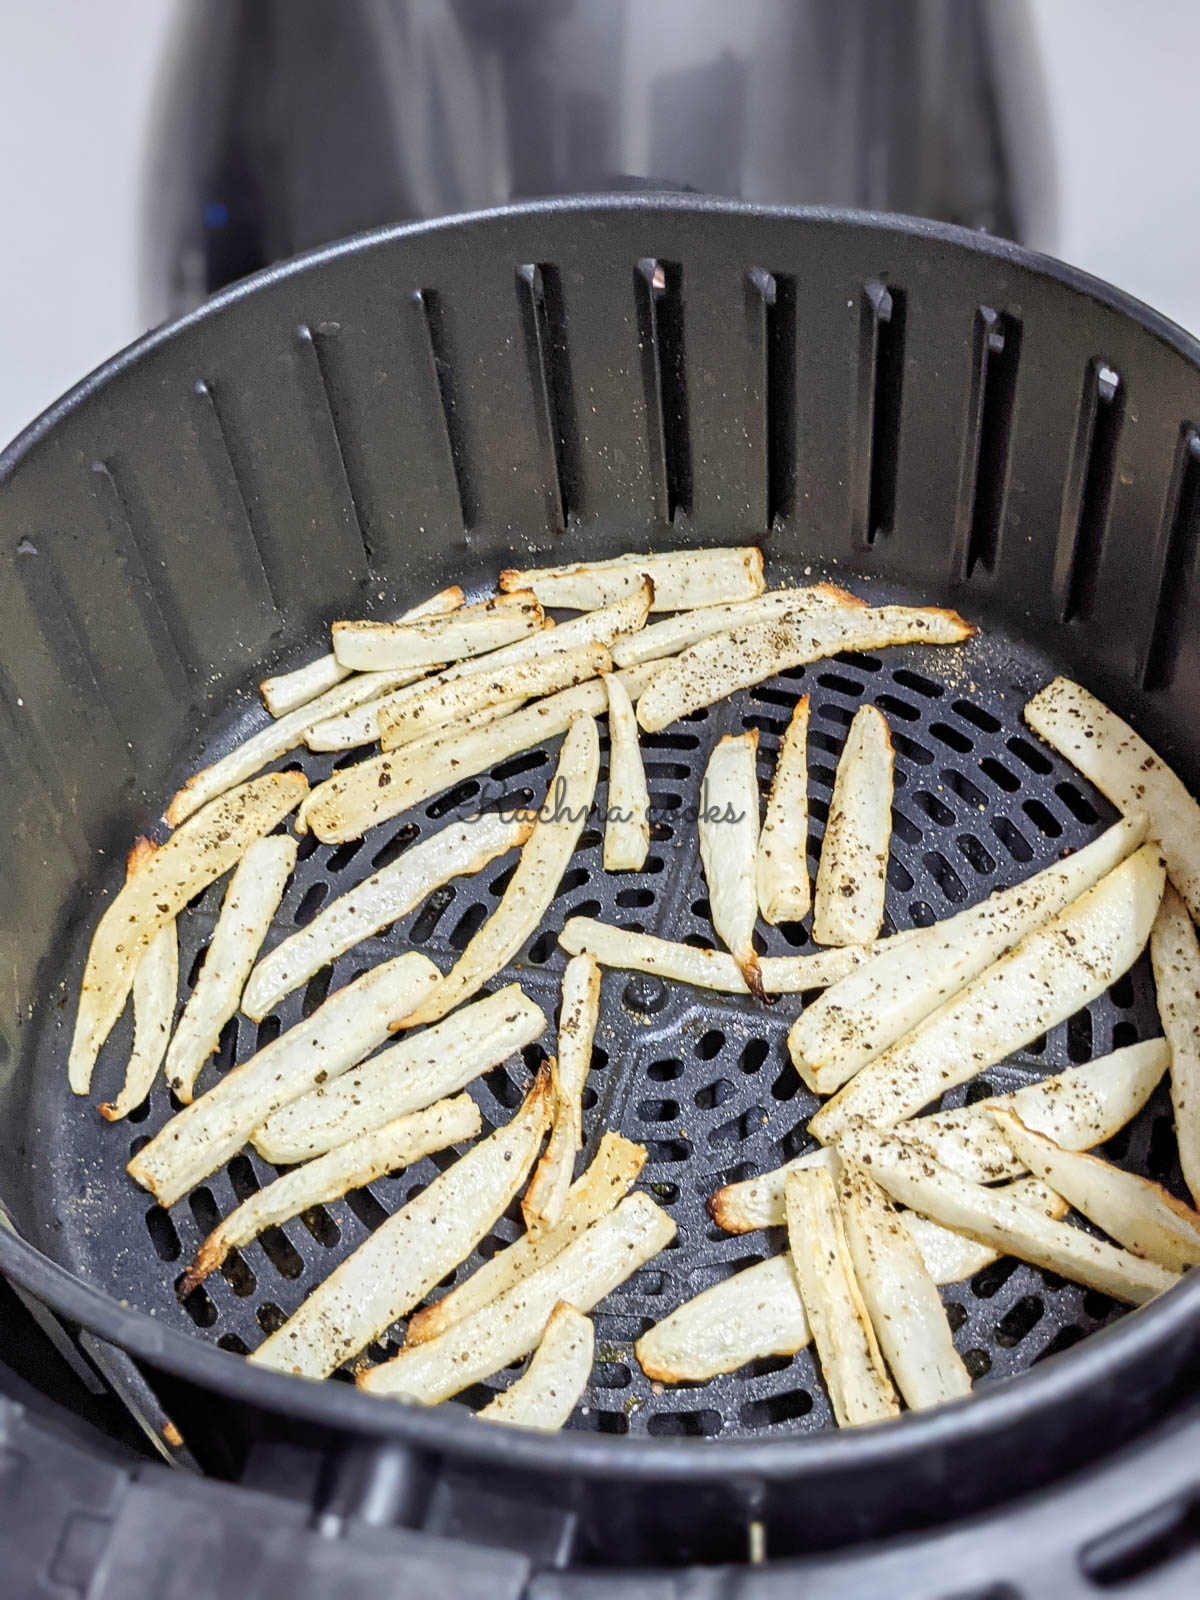 Air fried parsnip snips with golden brown edges in air fryer basket after air frying.